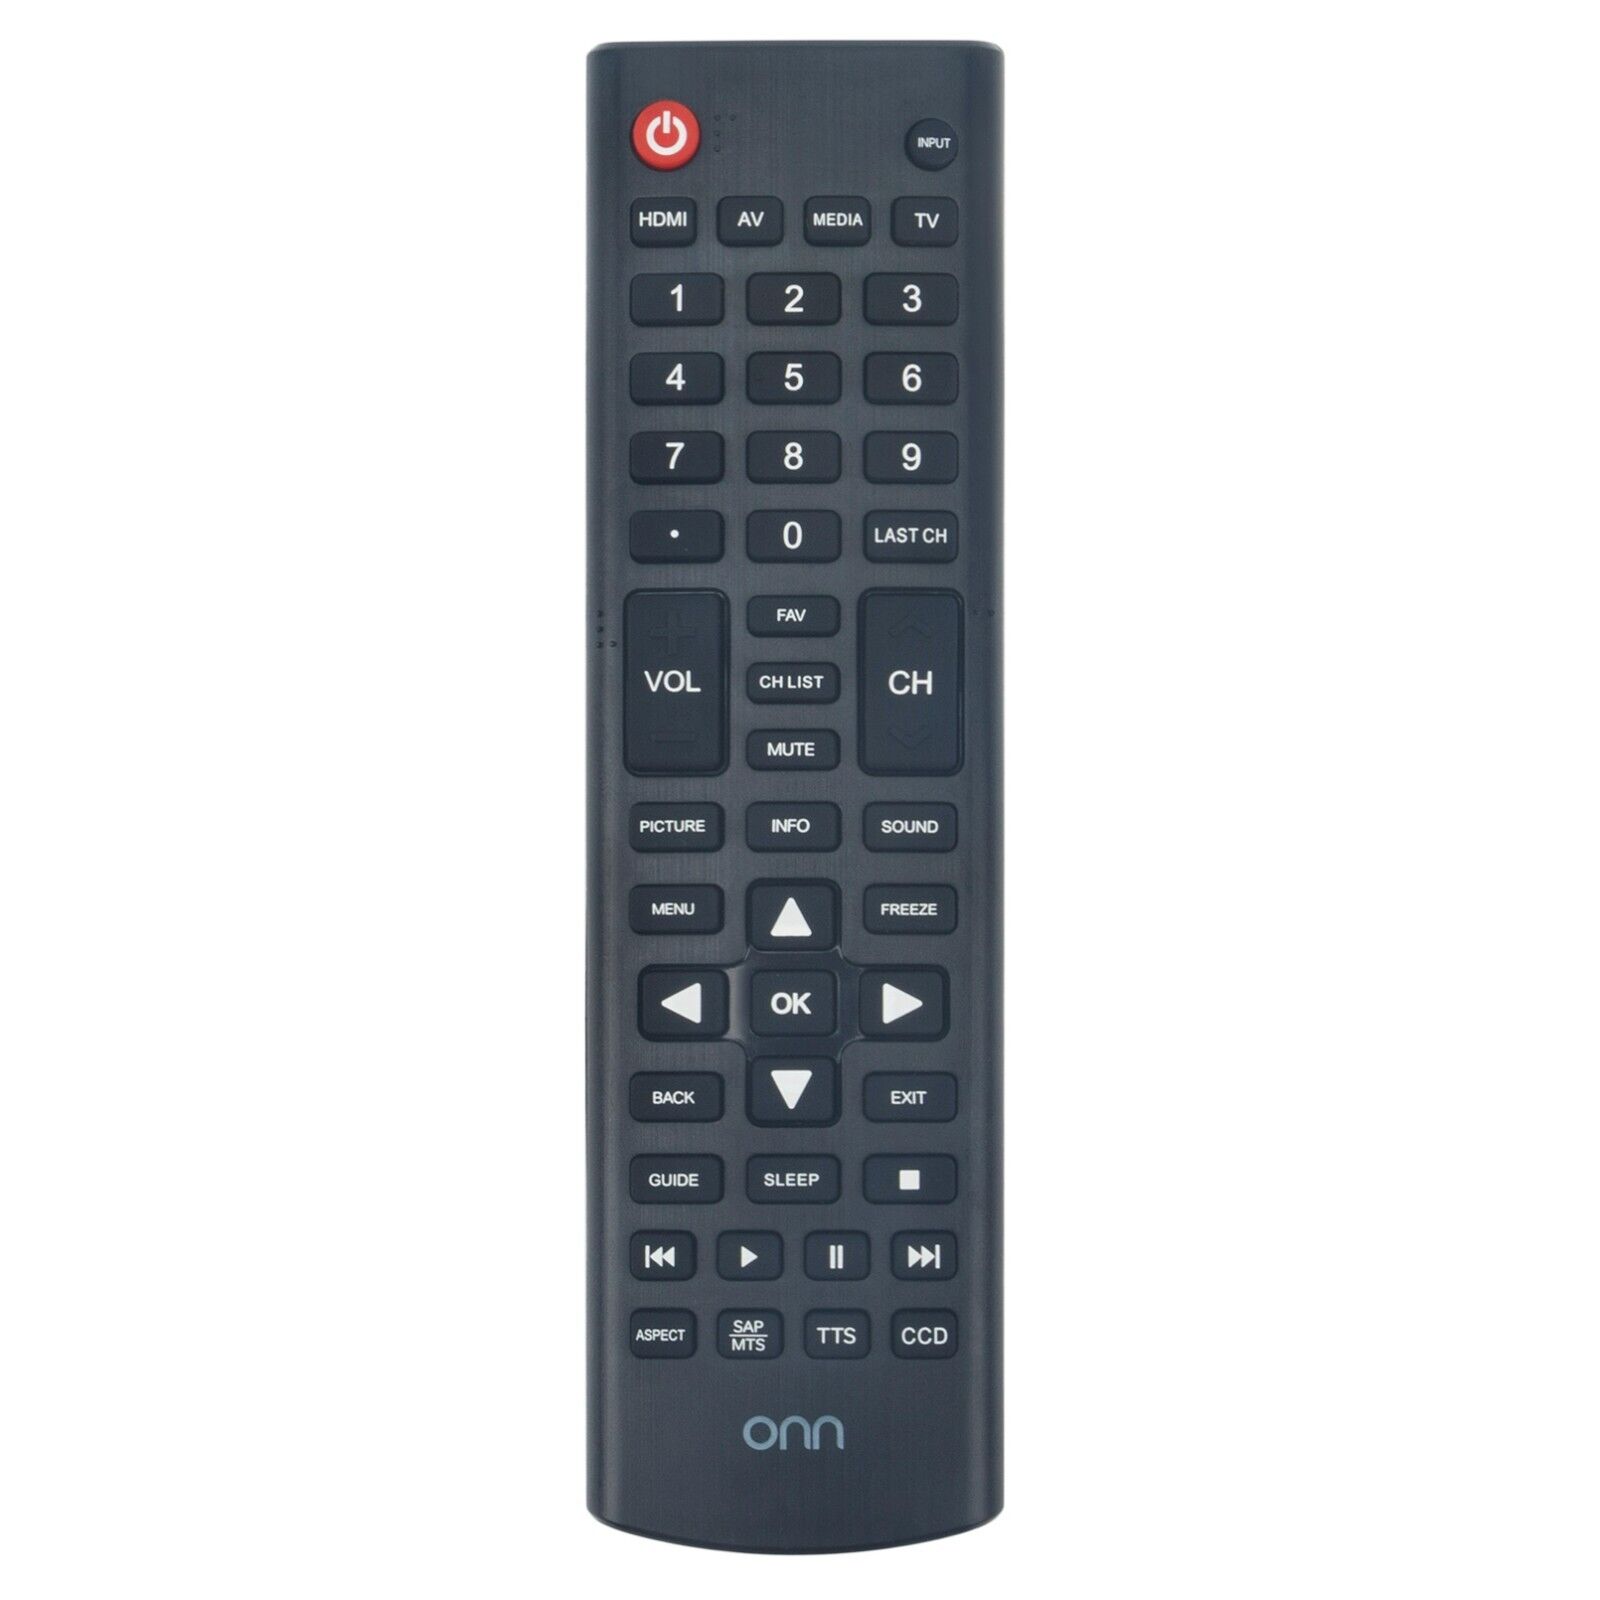 ONC50UB18C05 Replace Remote Control fit for ONN TV ONA32HB19E03 ONA55UB19E06